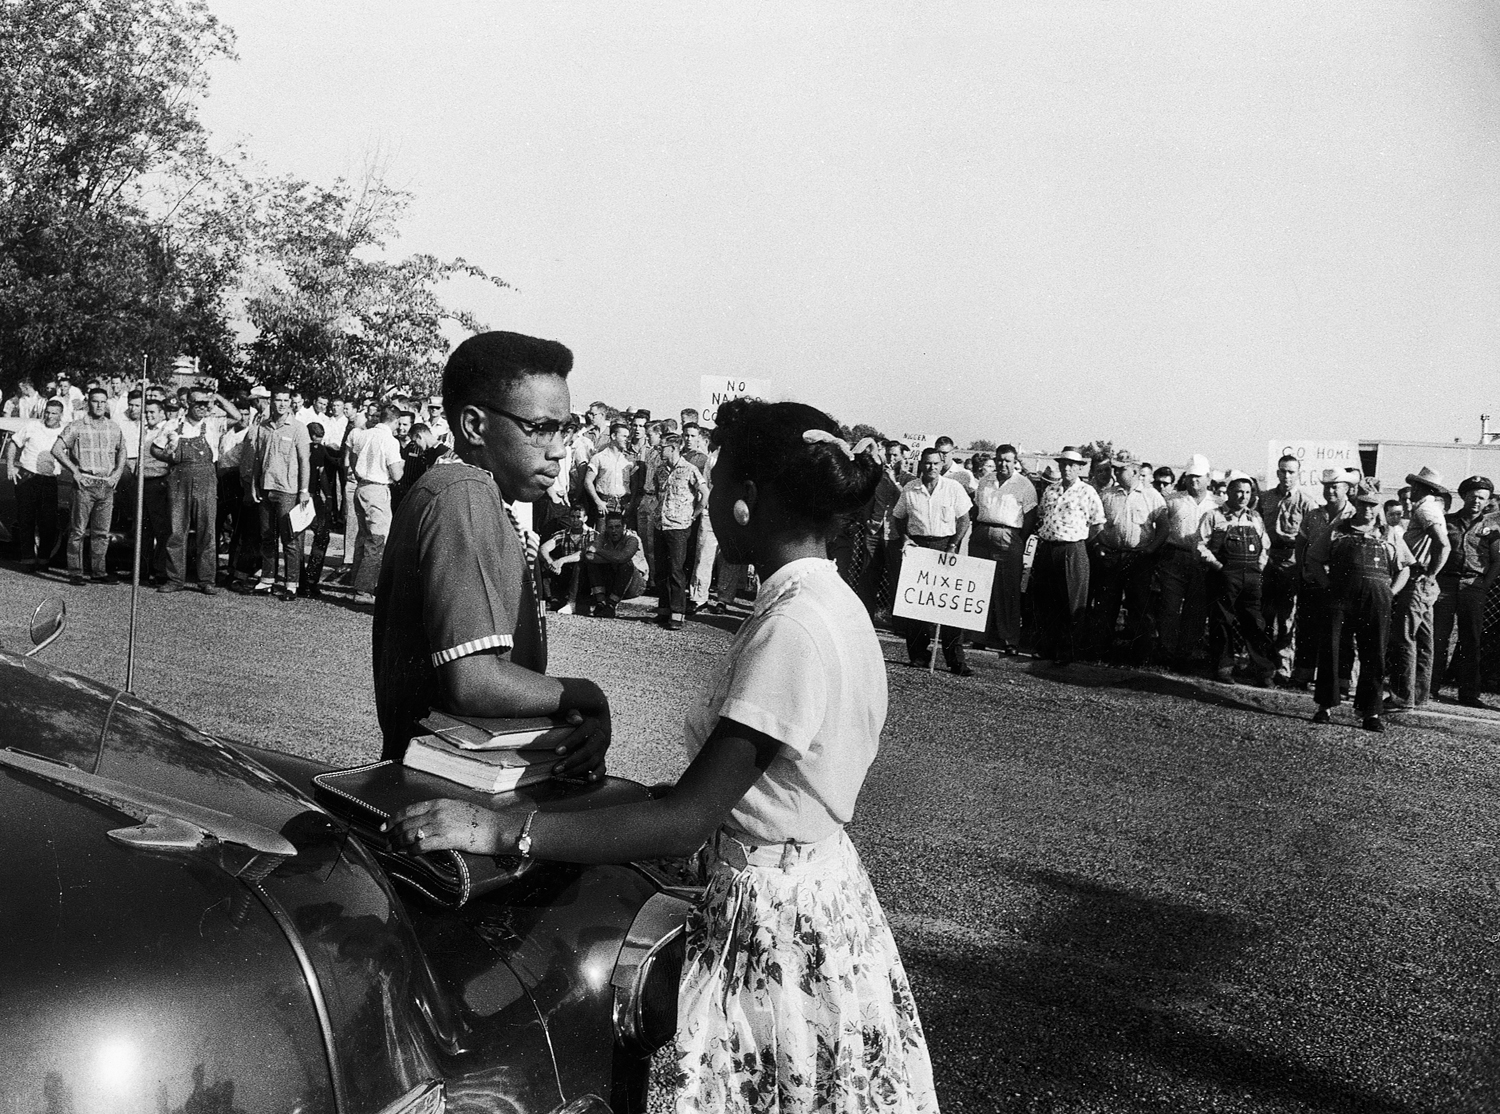 Students Steve Posten, 17, and Jessalyn Gray, 18, wait tensely beside a cab while a crowd of whites taunts them outside Texarkana Junior College, Texarkana, Tex., 1956. Jessalyn eventually asked police to escort them inside. When the police refused, the students left.